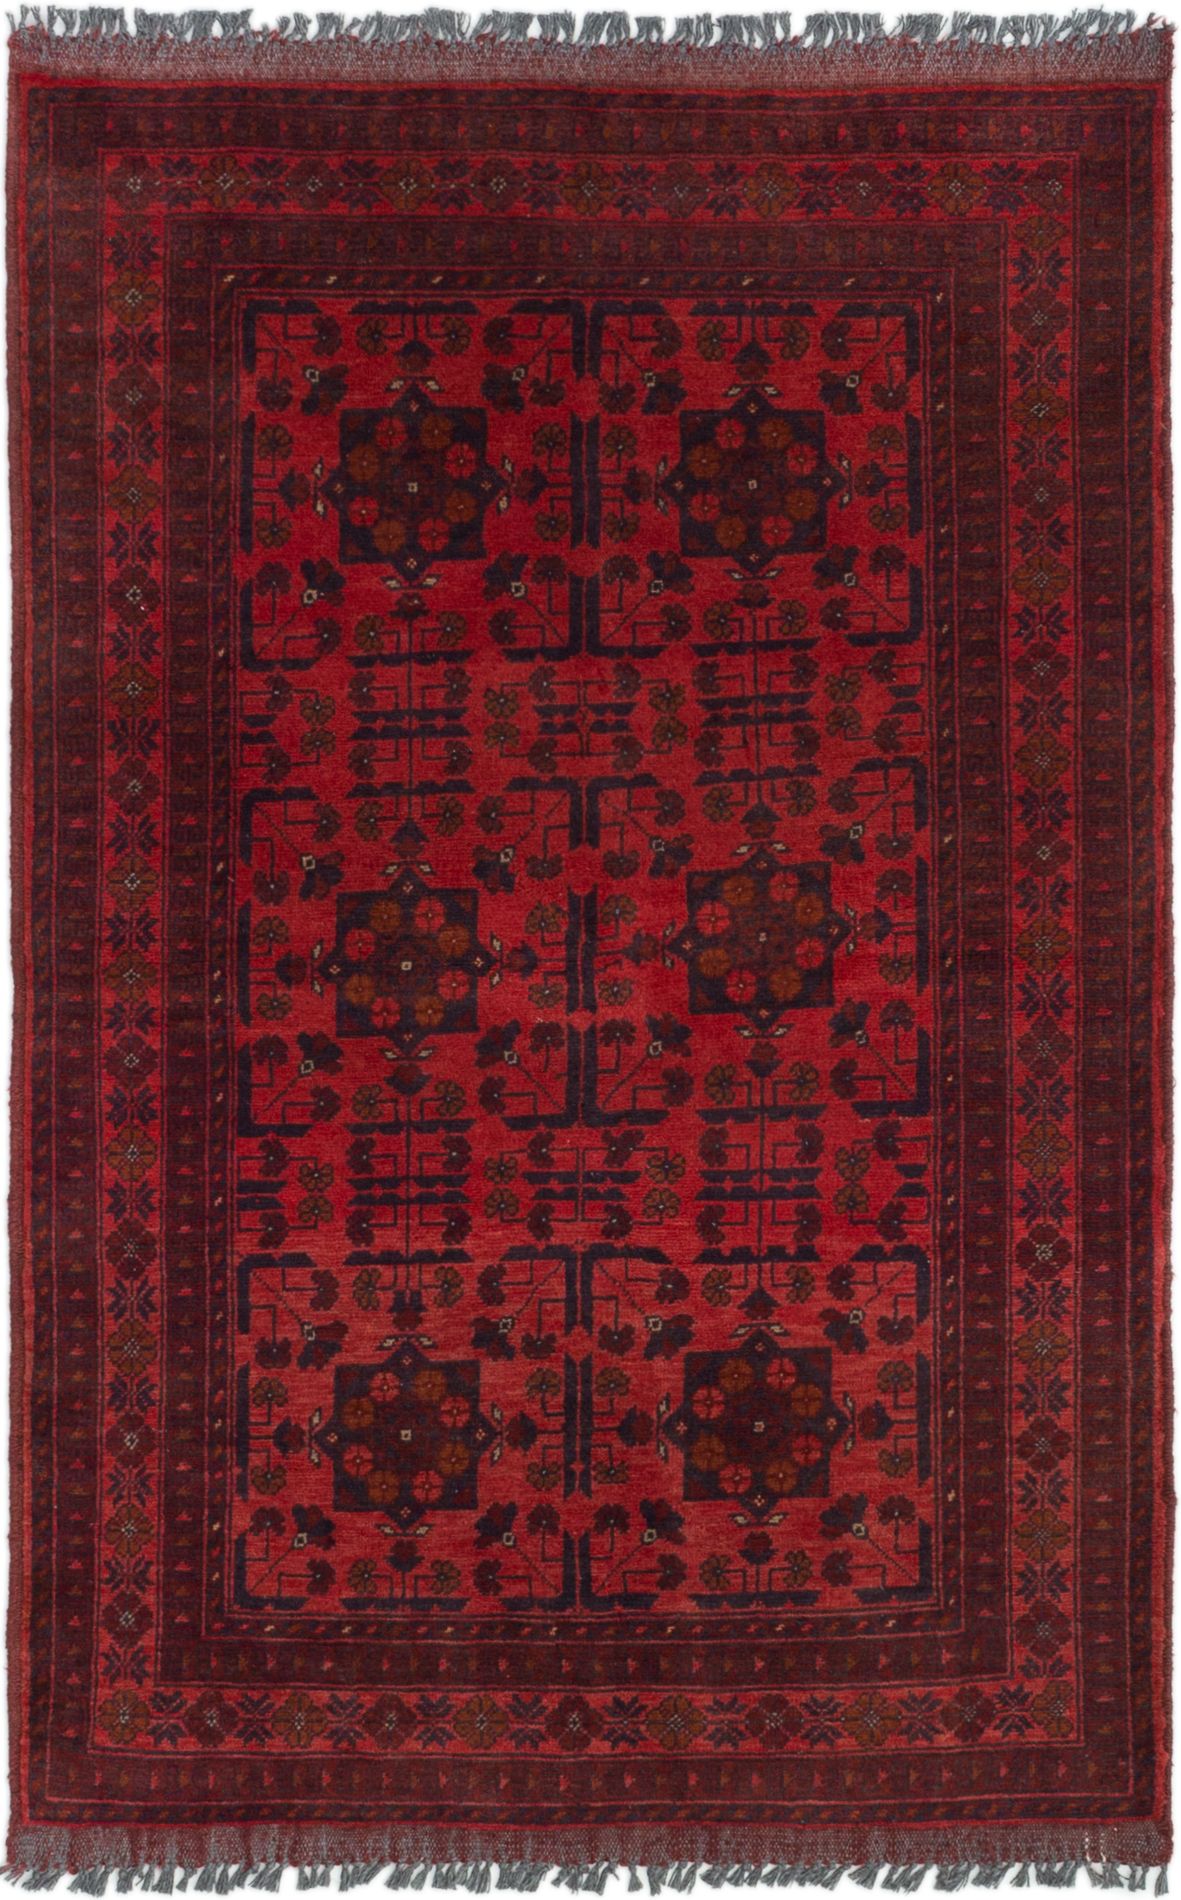 Hand-knotted Finest Khal Mohammadi Red Wool Rug 3'3" x 5'2"  Size: 3'3" x 5'2"  